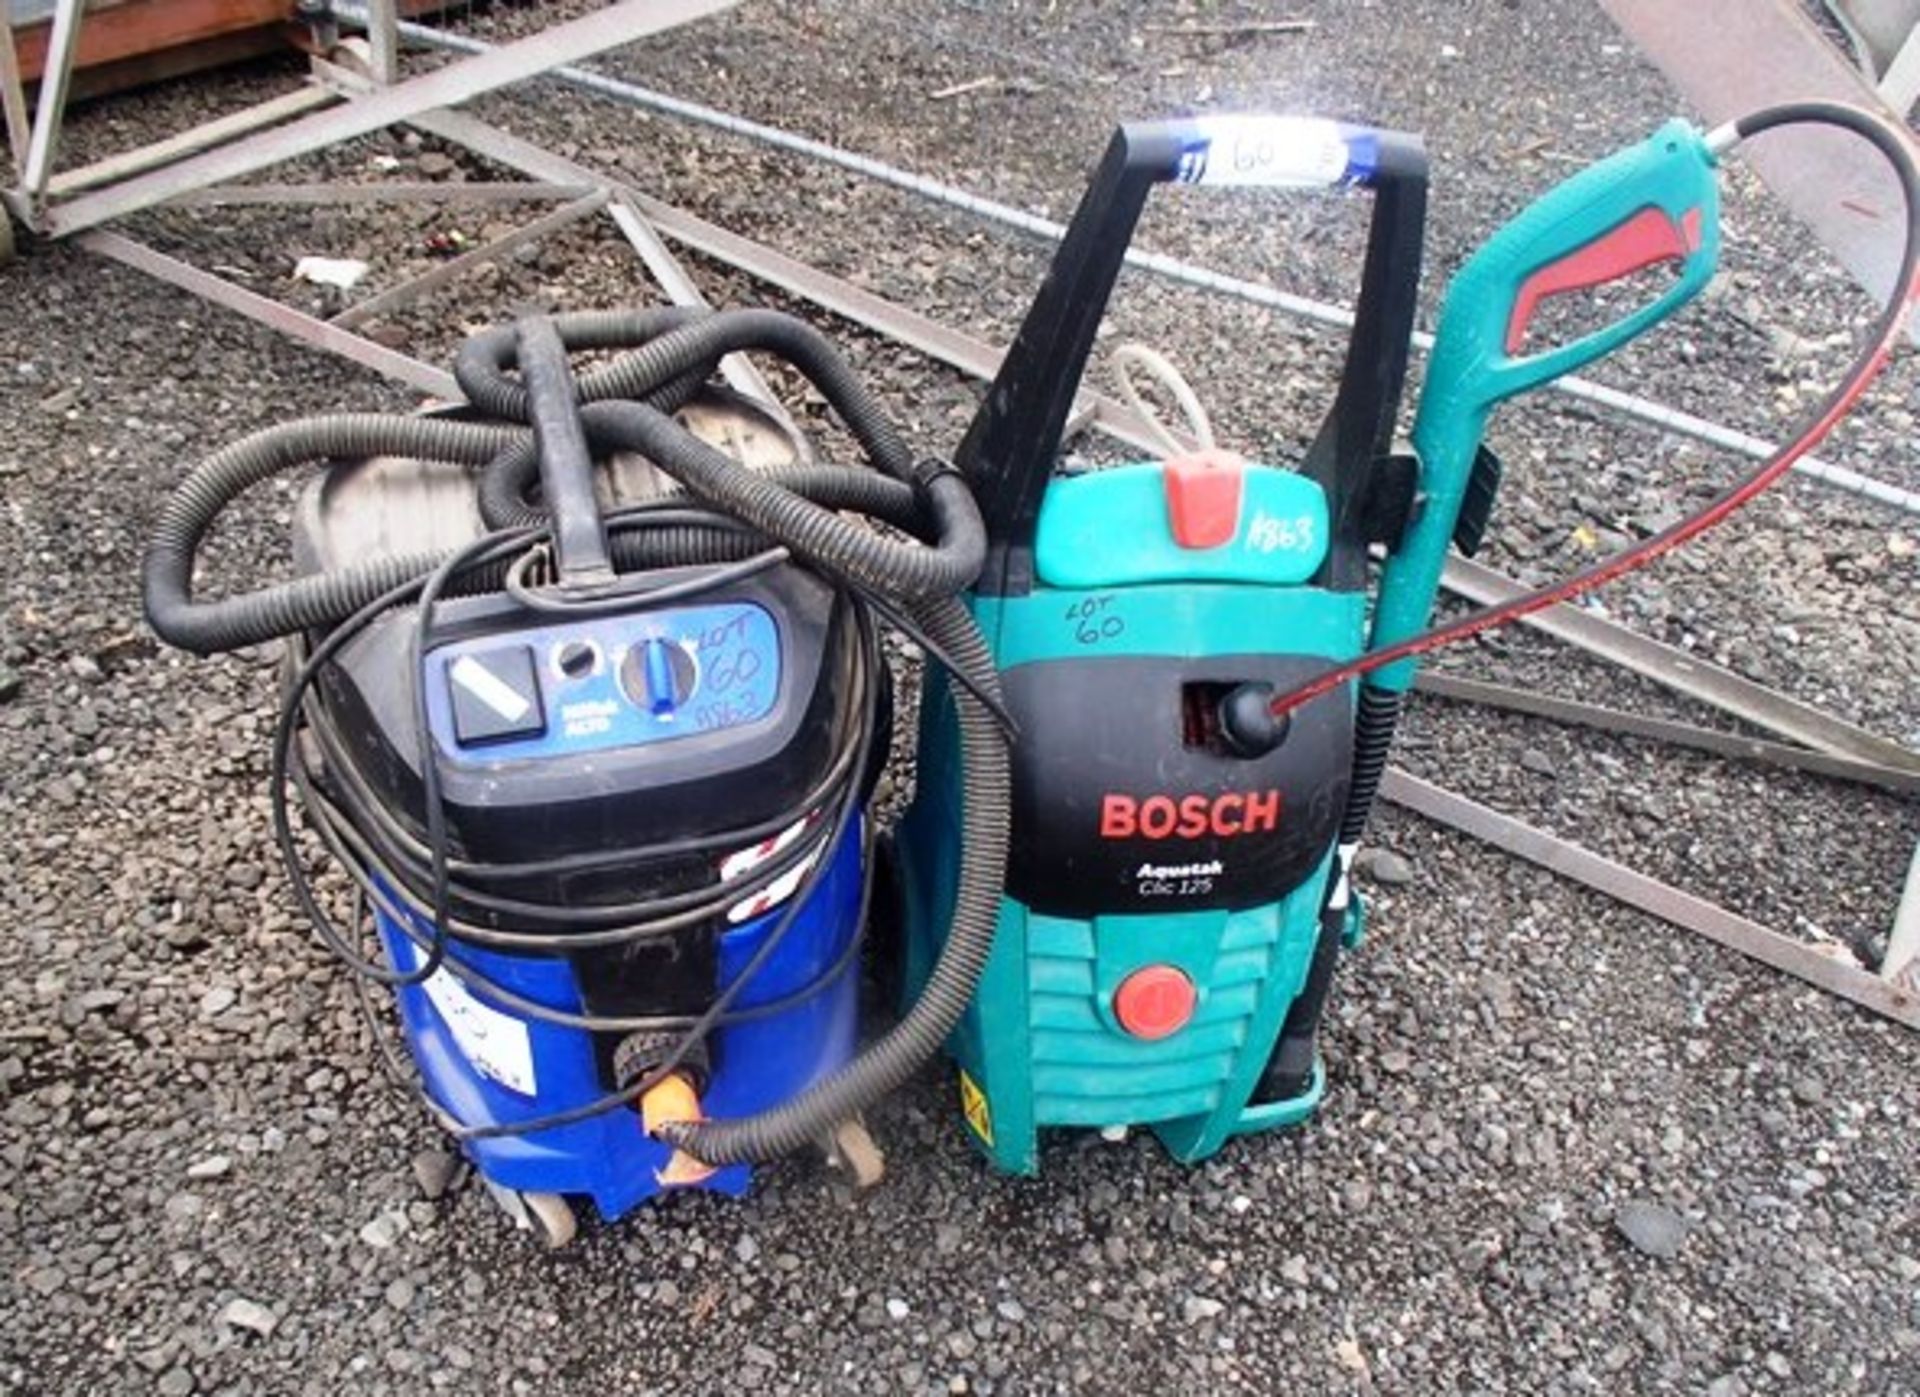 BOSCH AQUATIC PRESSURE WASHER ALONG WITH NILFISK INDUSTRIAL HOOVER**DIRECT FROM COUNCIL** - Image 2 of 3